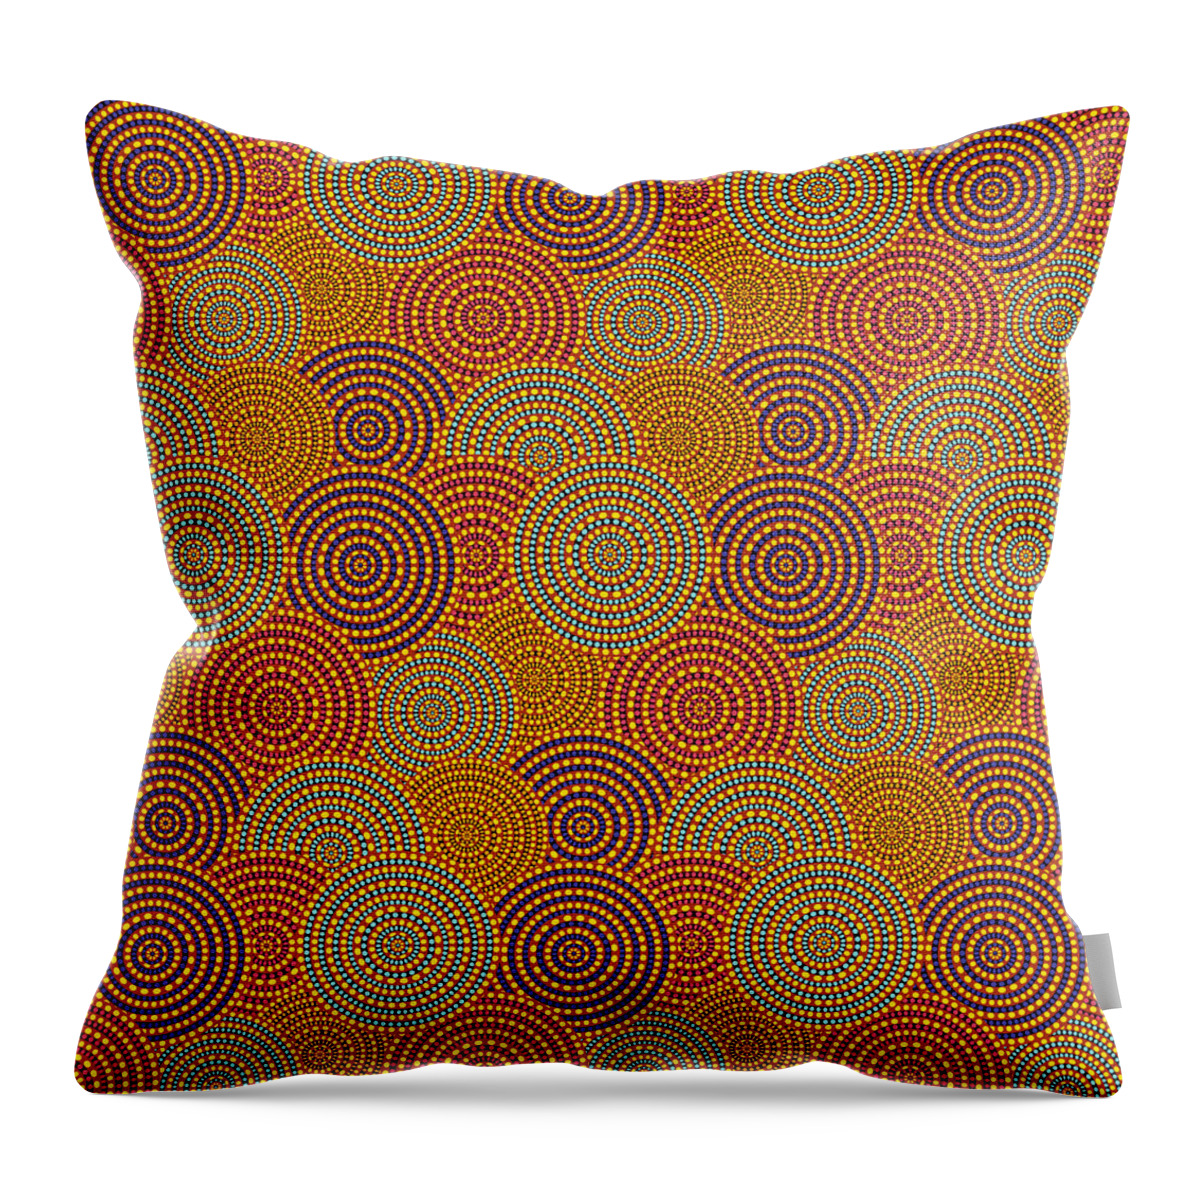 Australian Outback Throw Pillow featuring the digital art Australian Outback Circles by Eartha Designs